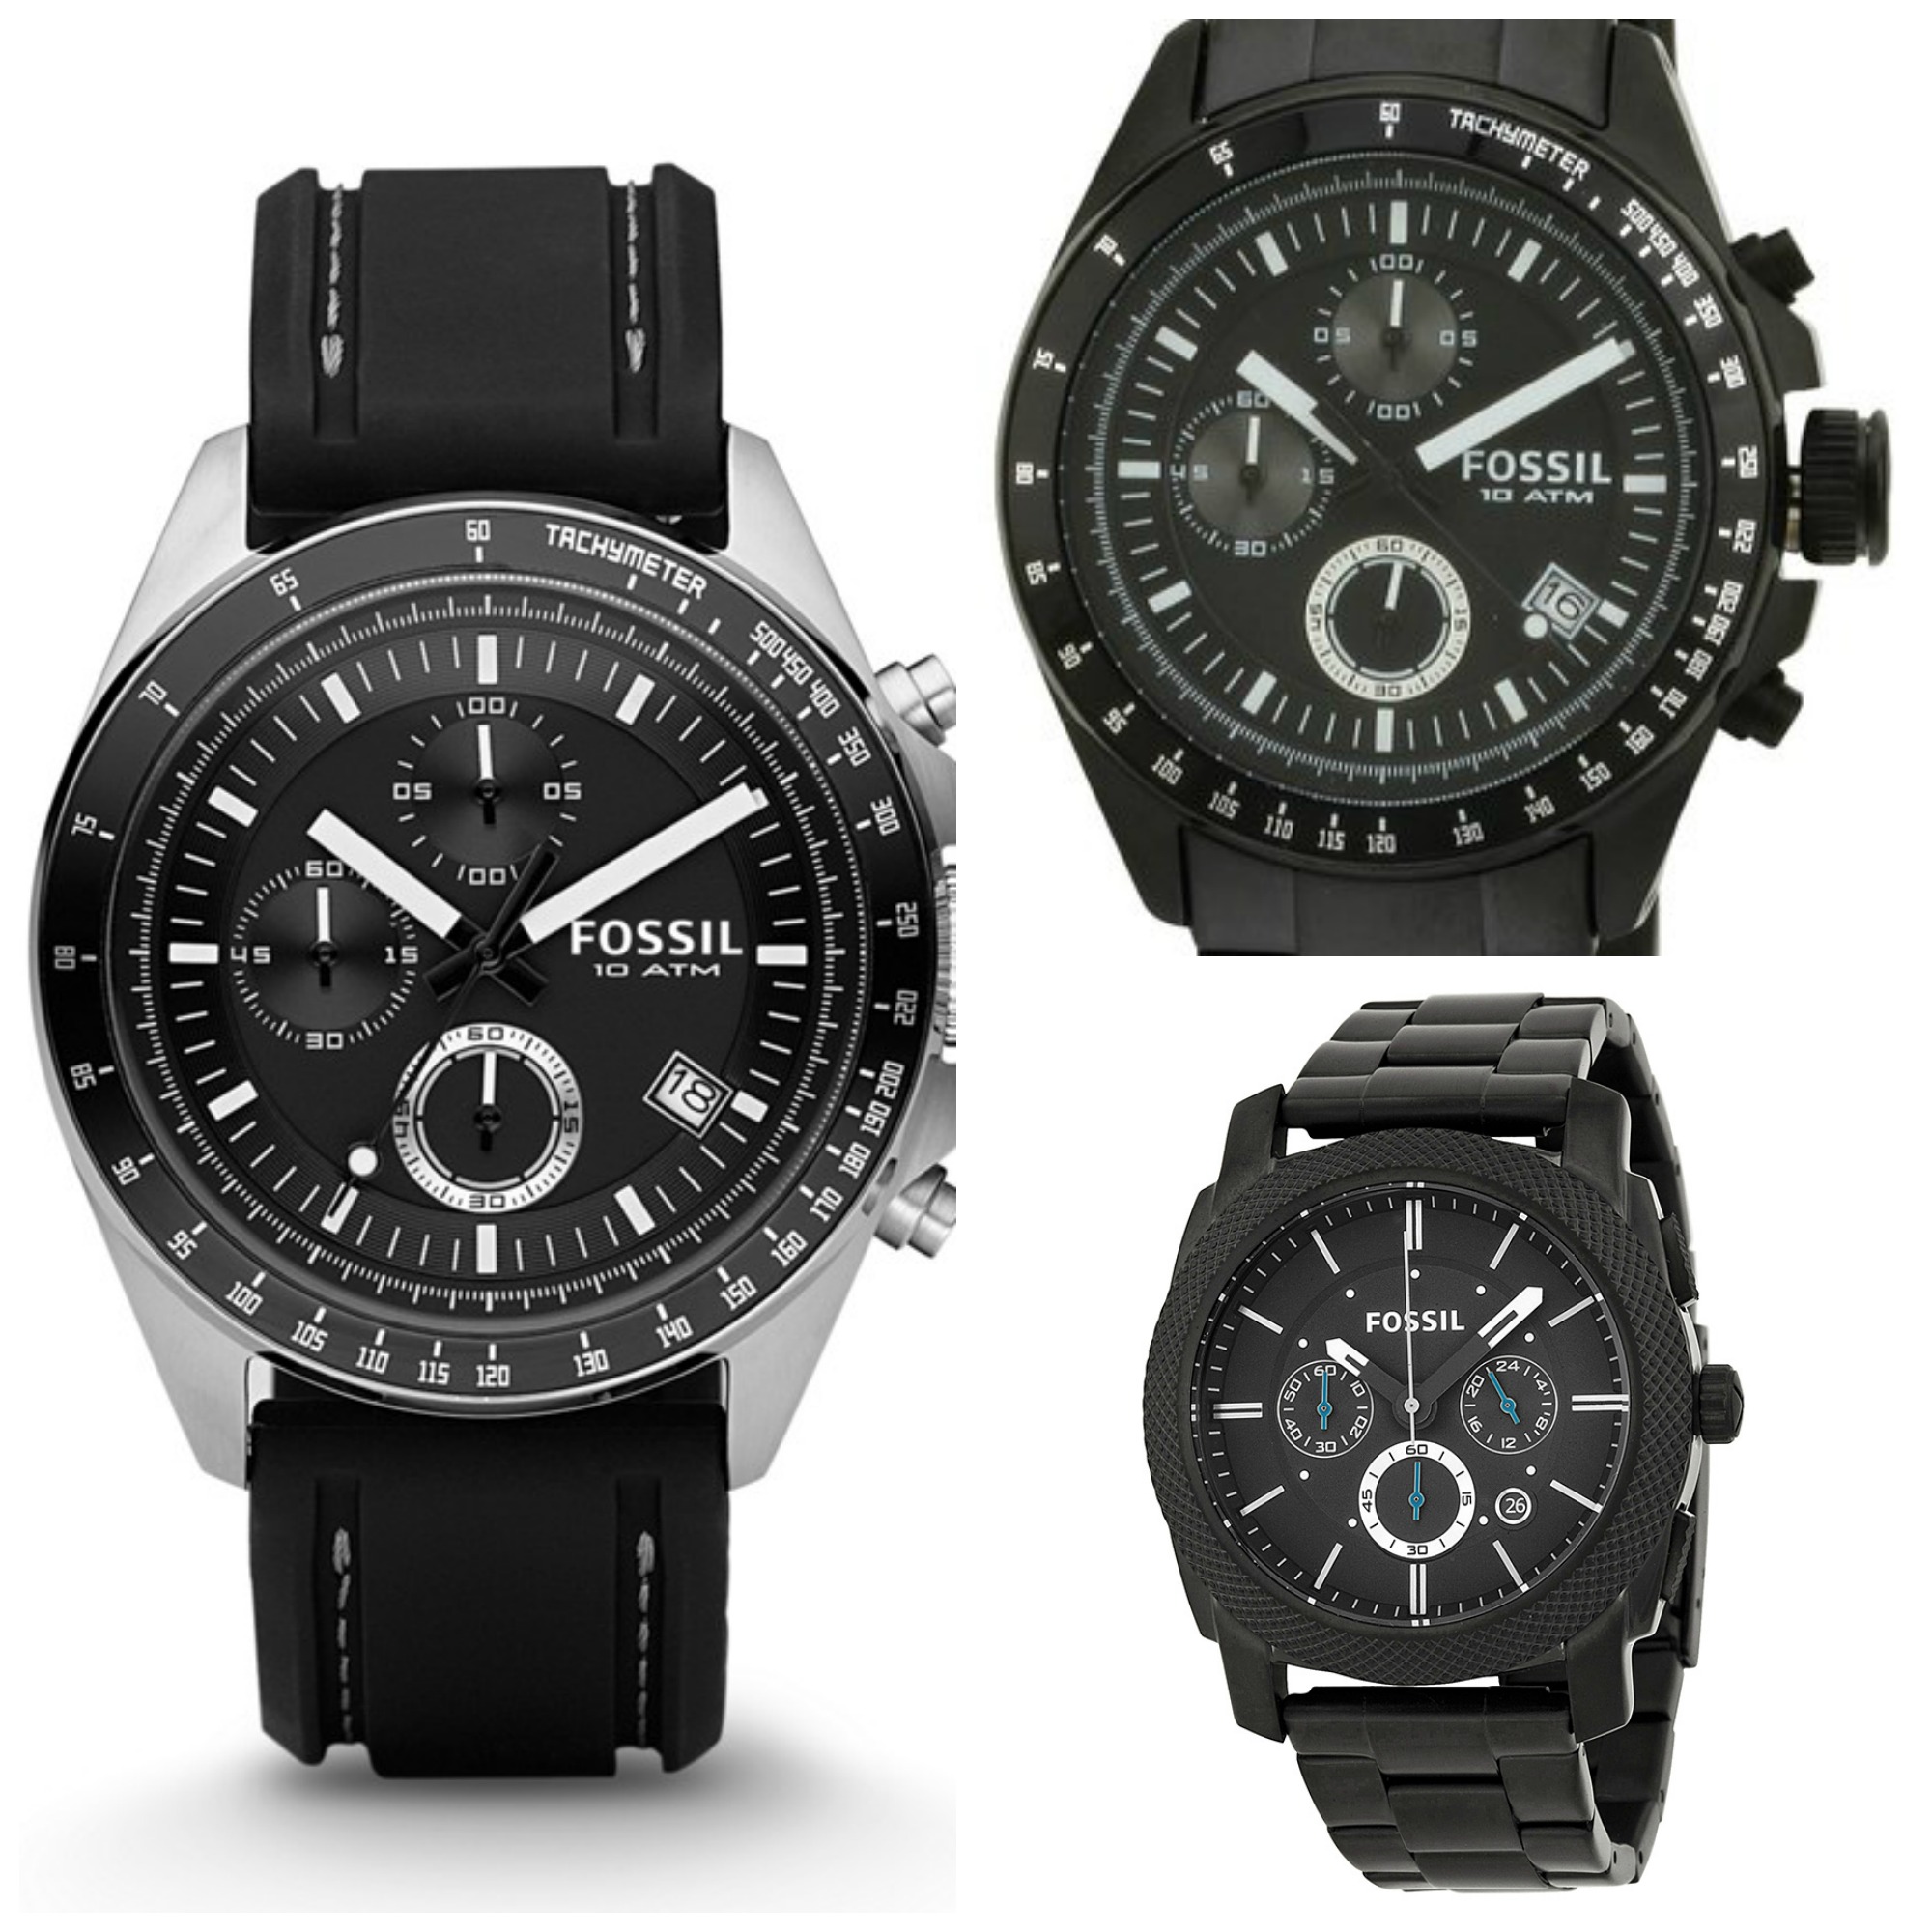 7 Most Popular Black Fossil Watches For Men Under £100 - The Watch Blog